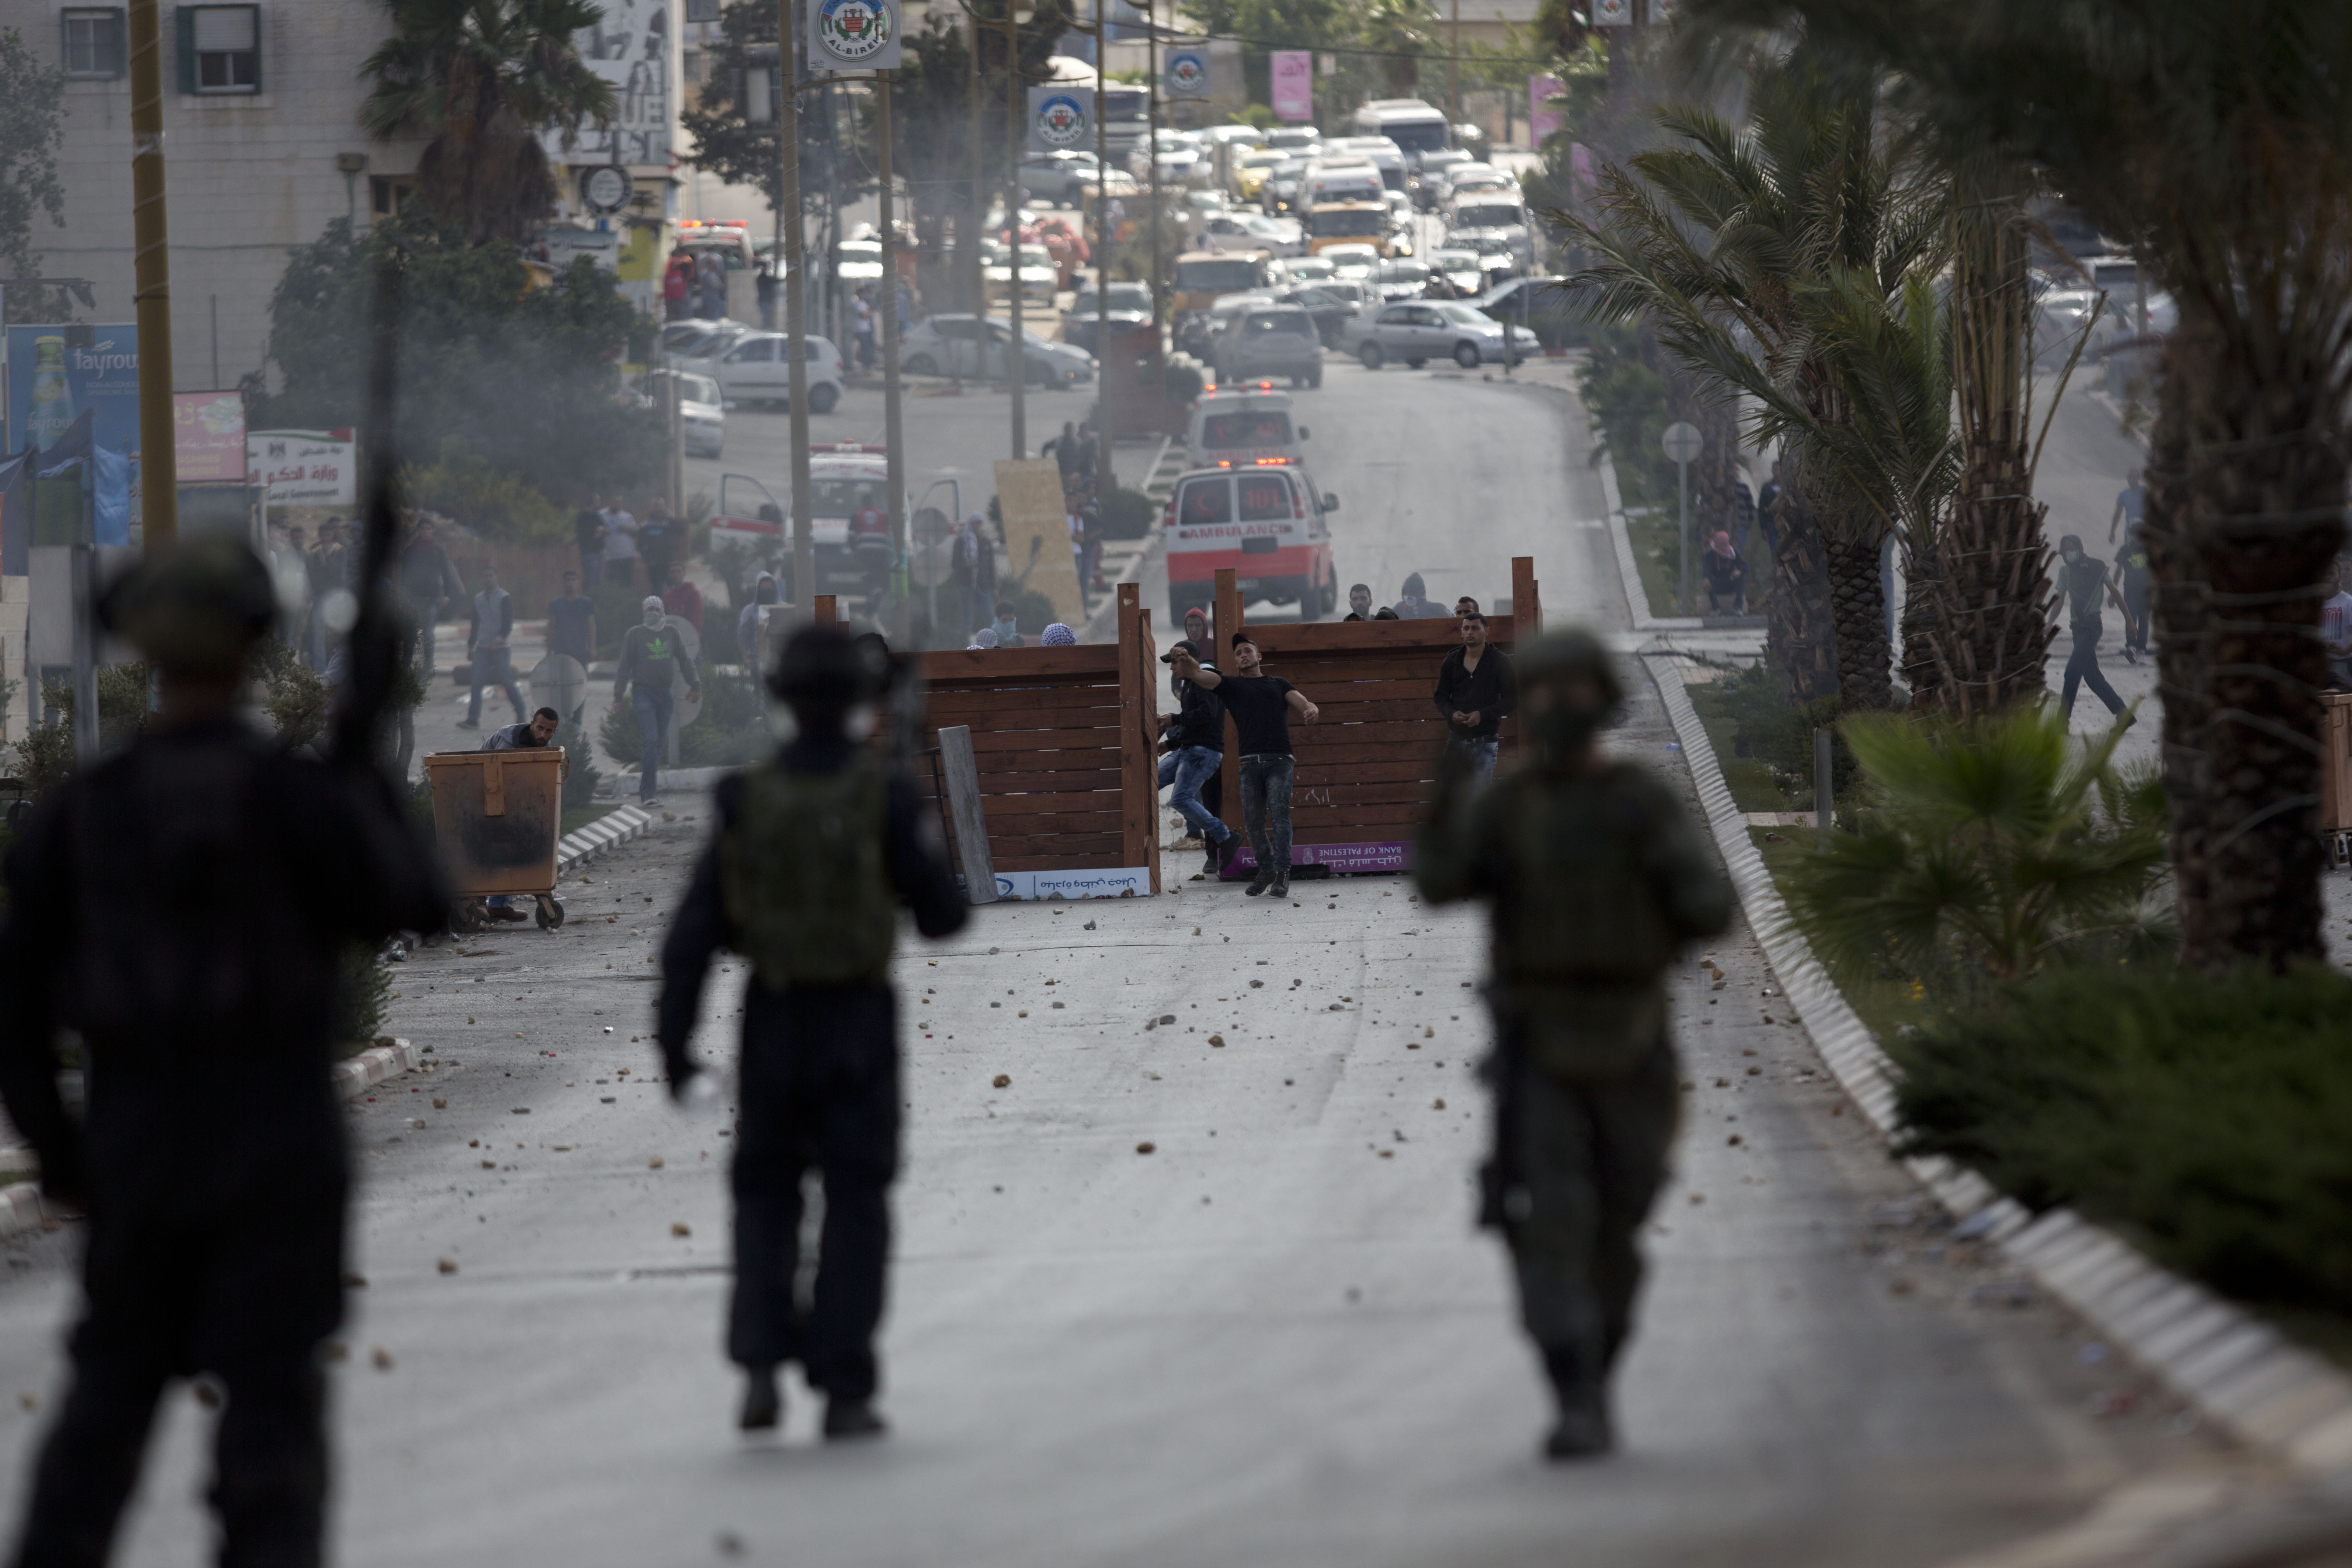 Palestinian protesters throw stones at Israeli security forces during clashes near Ramallah, West Bank, Thursday, Oct. 8, 2015. Dozens of Palestinian protesters threw stones at Israeli troops near the West Bank city of Ramallah and elsewhere on Thursday. Israeli forces responded with tear gas and stun grenades. (AP Photo/Majdi Mohammed)